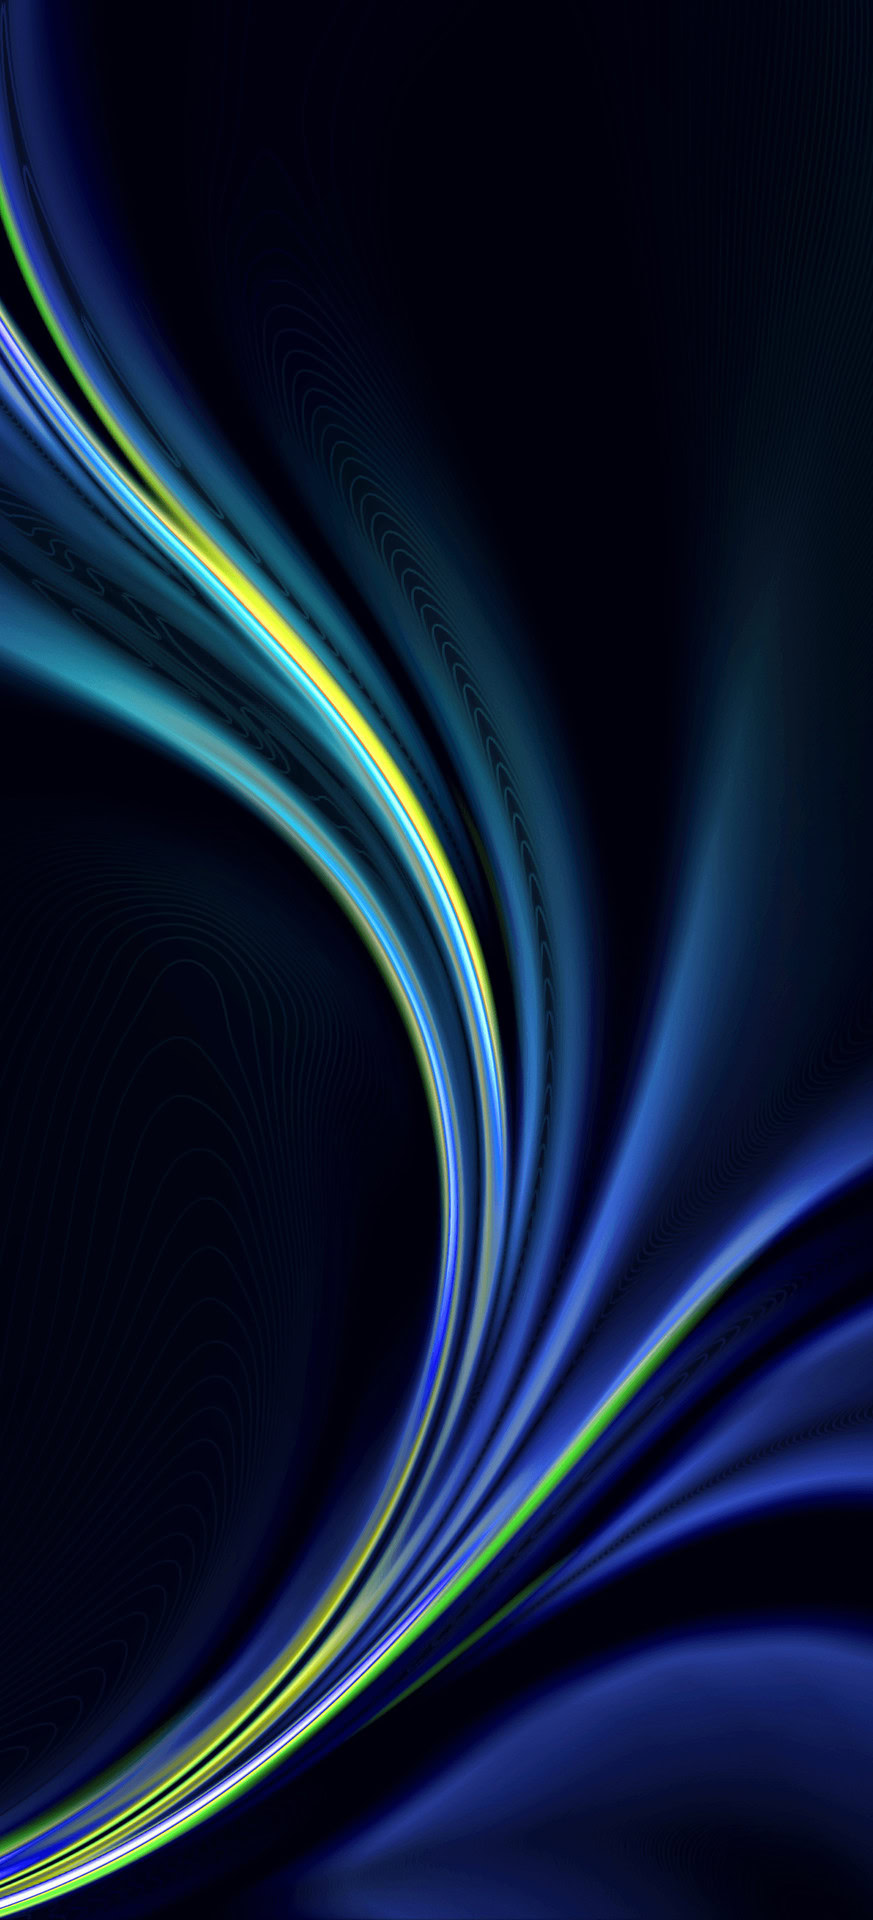 Download The Oneplus 8 Official Wallpapers Now Android Authority